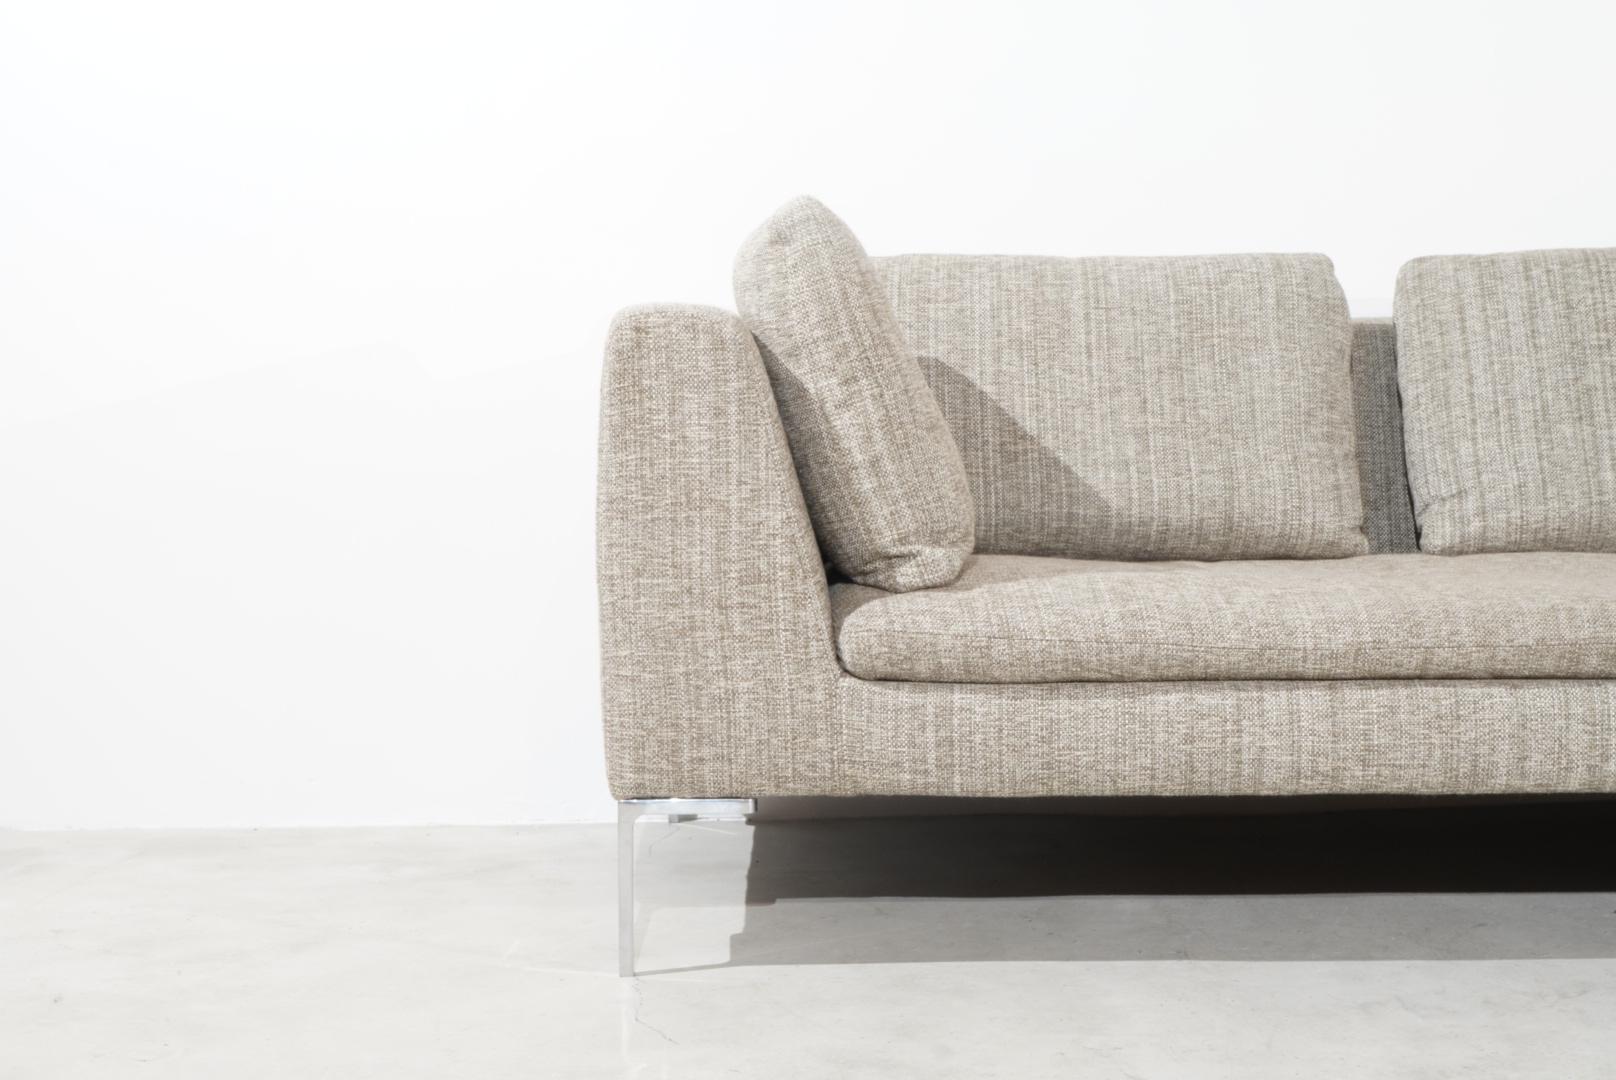 Super comfortable sofa by the famous Designer Antonio Citterio. The two-part sofa was manufactured by Charles for B&B Italia and designed 1997. 
The Sofa has L-shaped aluminium legs, polyurethane foam upholstered frame and beige-coloured textile